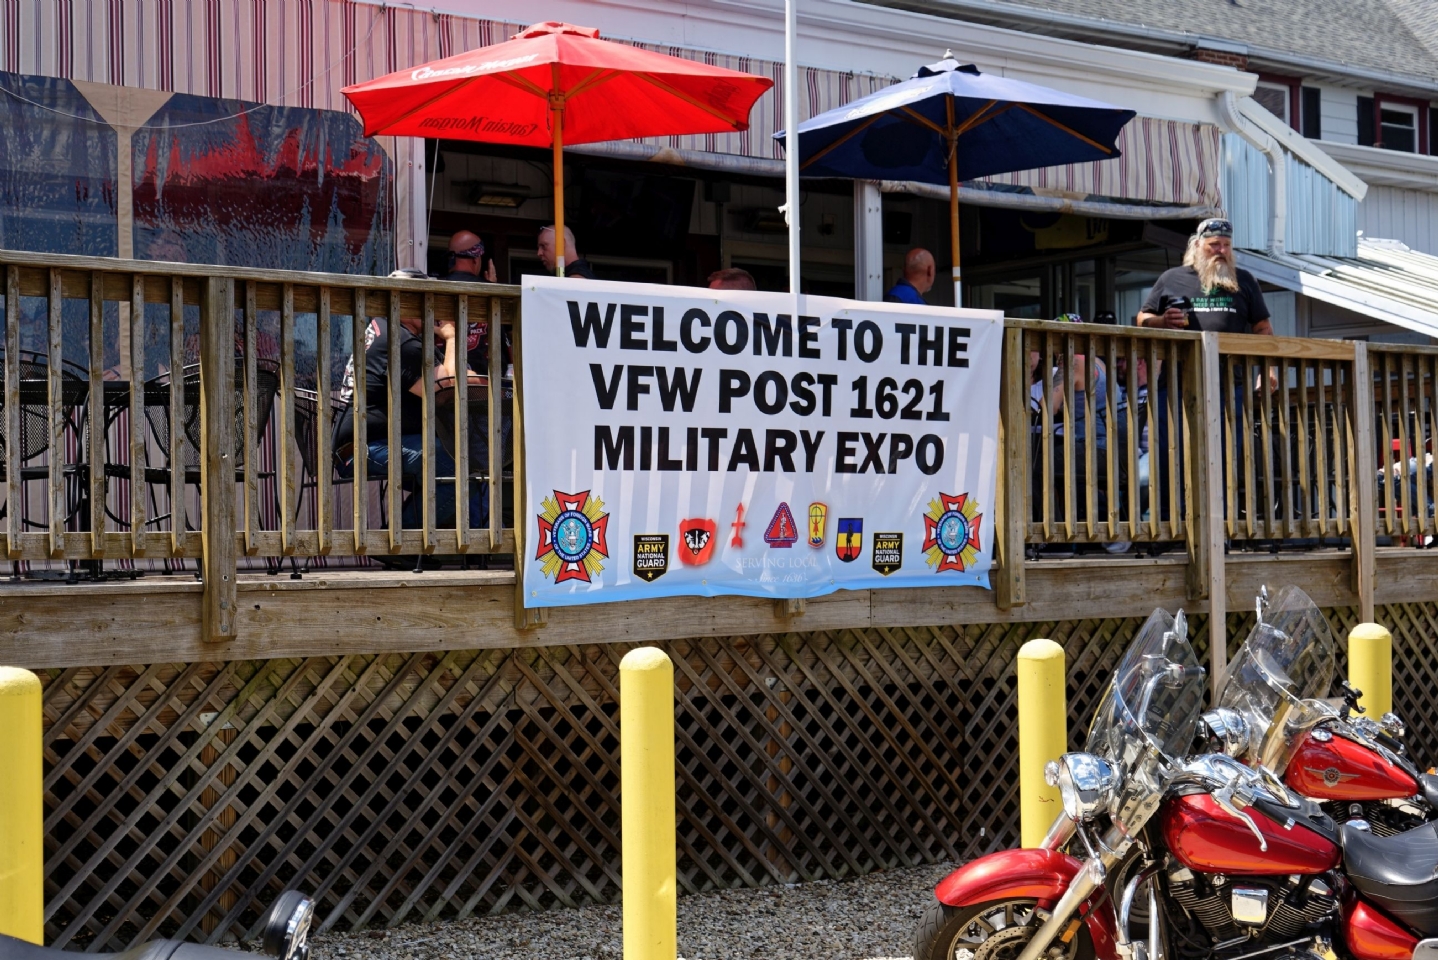 Our welcome banner, courtesy of the Army National Guard.